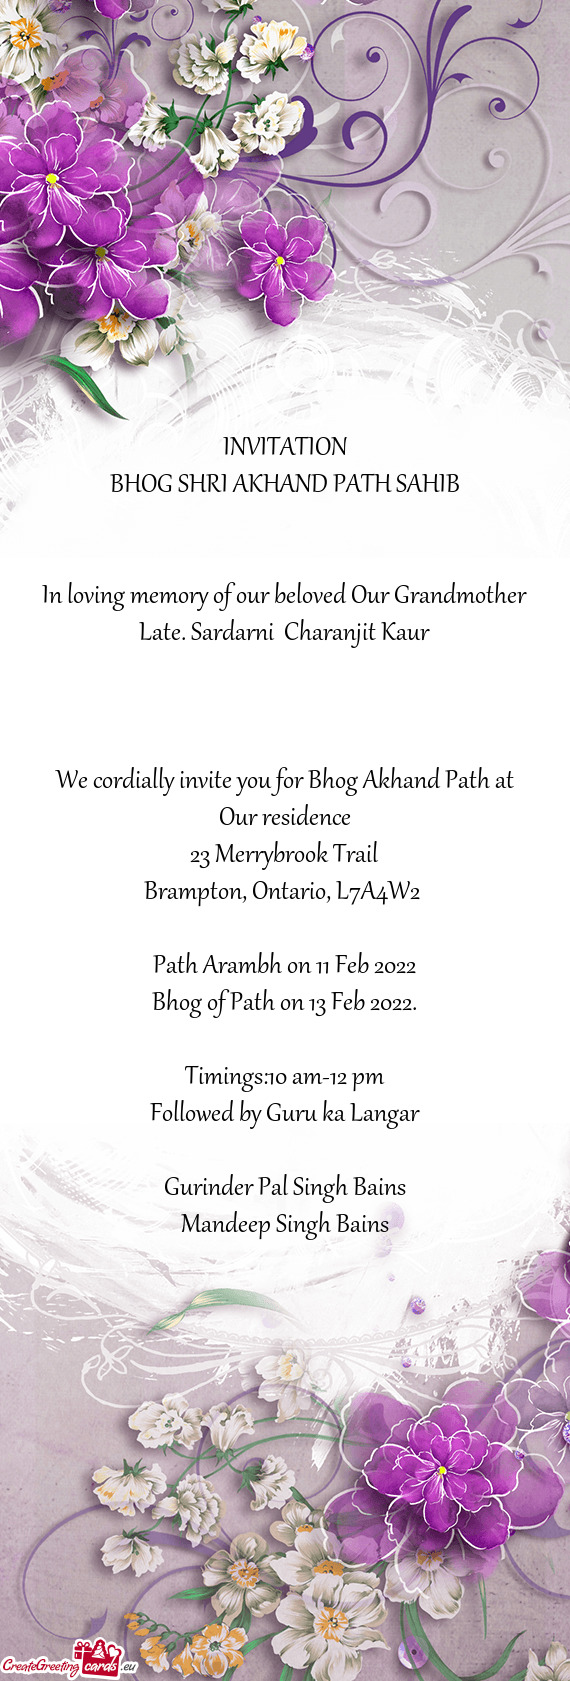 In loving memory of our beloved Our Grandmother Late. Sardarni Charanjit Kaur